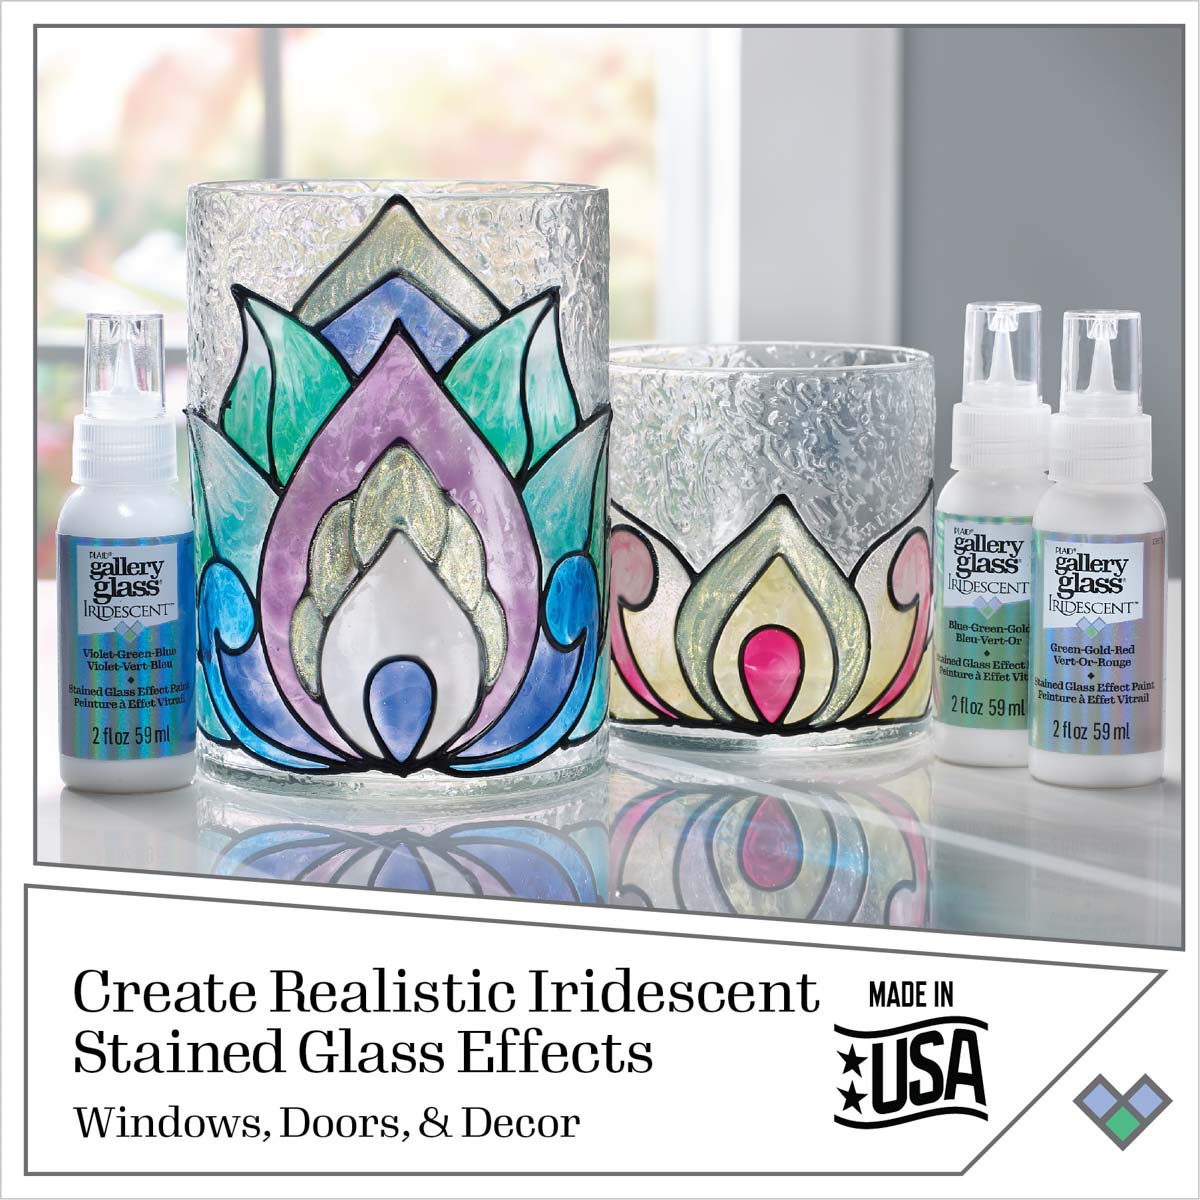 Shop Plaid Gallery Glass ® Iridescent™ Stained Glass Effect Paint